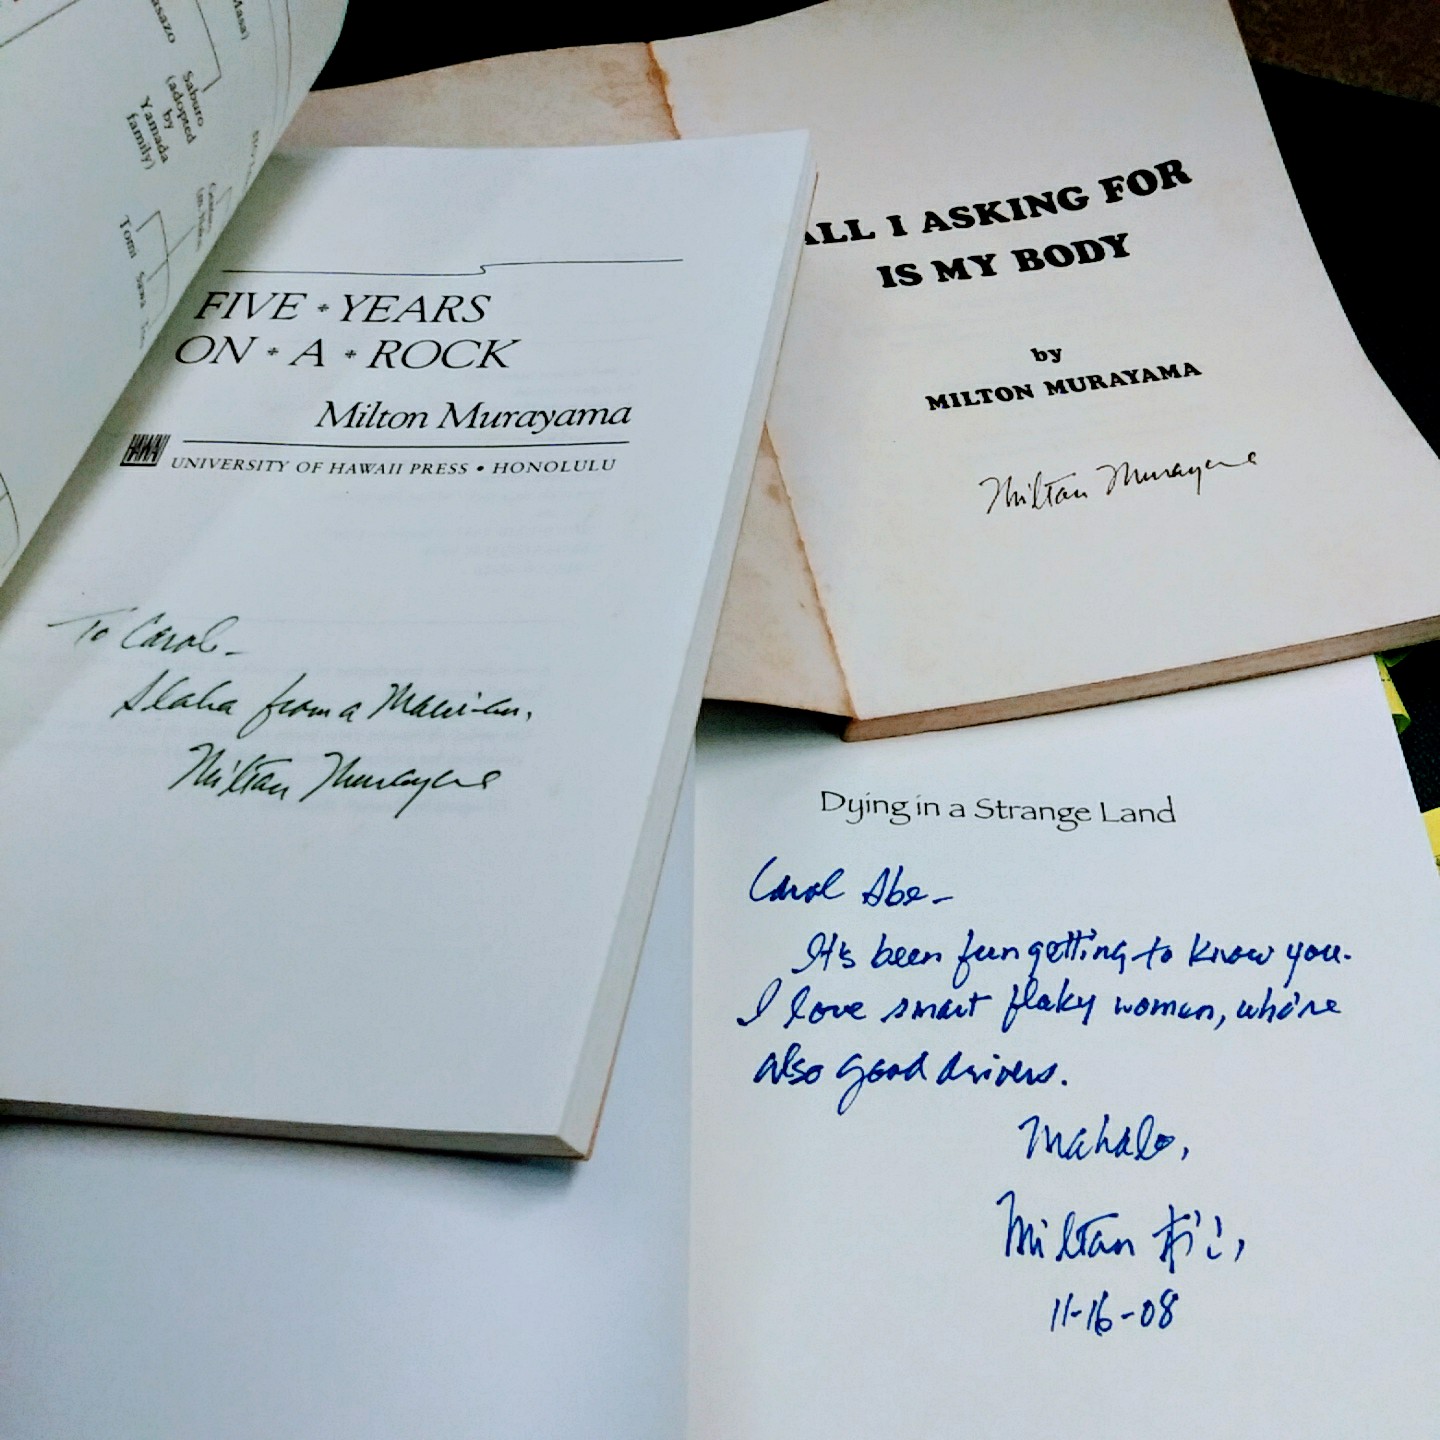 3 books opened to page showing author signed the book